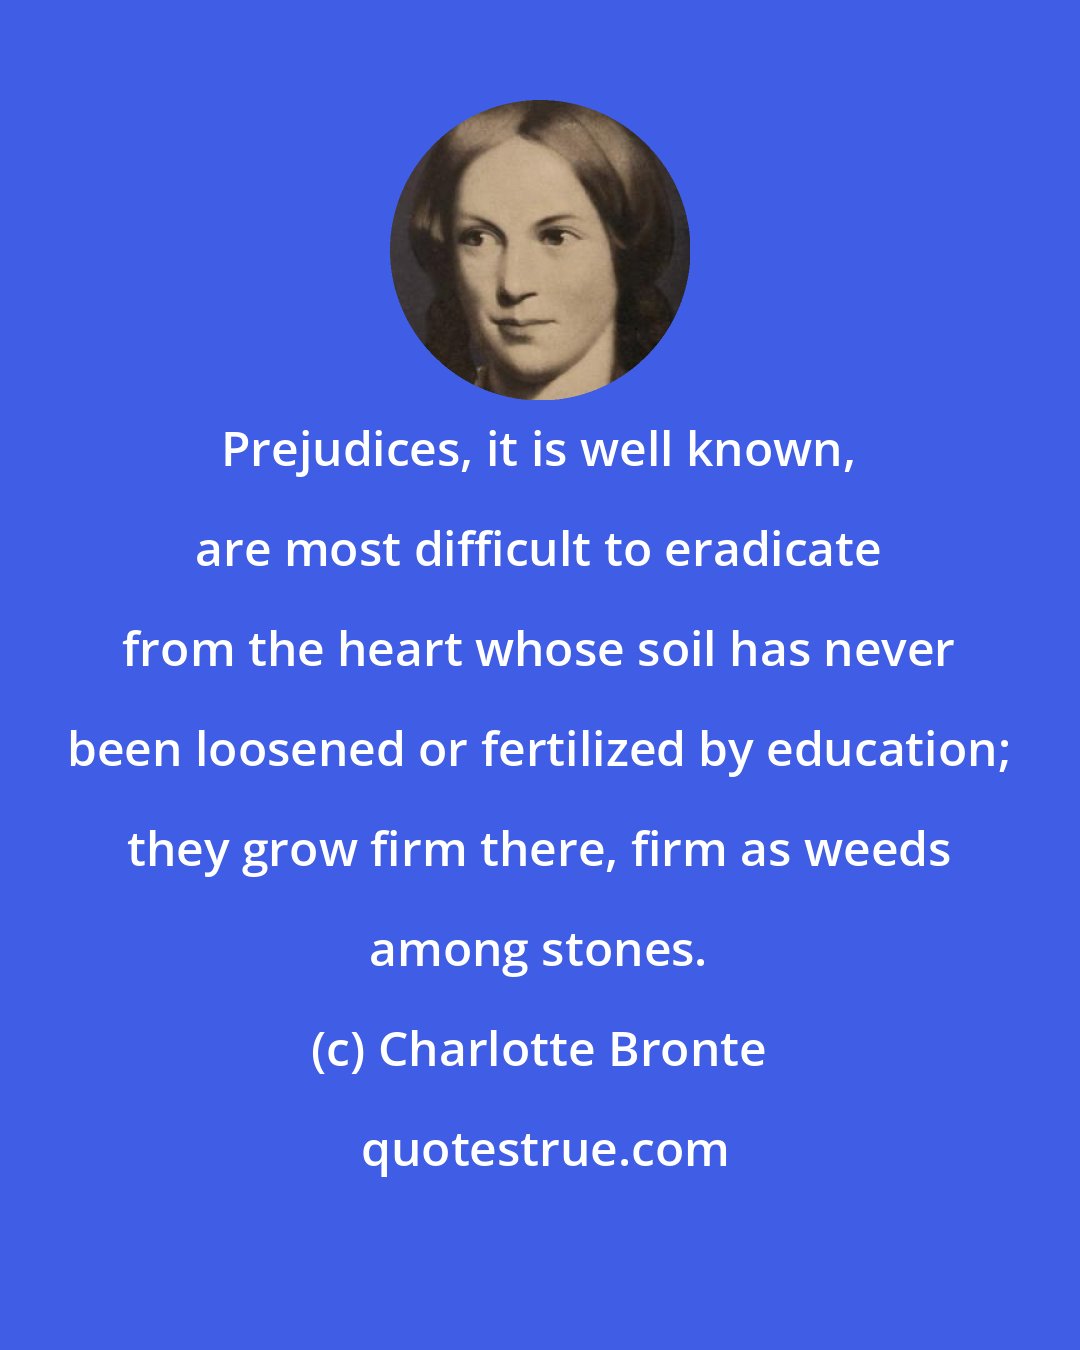 Charlotte Bronte: Prejudices, it is well known, are most difficult to eradicate from the heart whose soil has never been loosened or fertilized by education; they grow firm there, firm as weeds among stones.